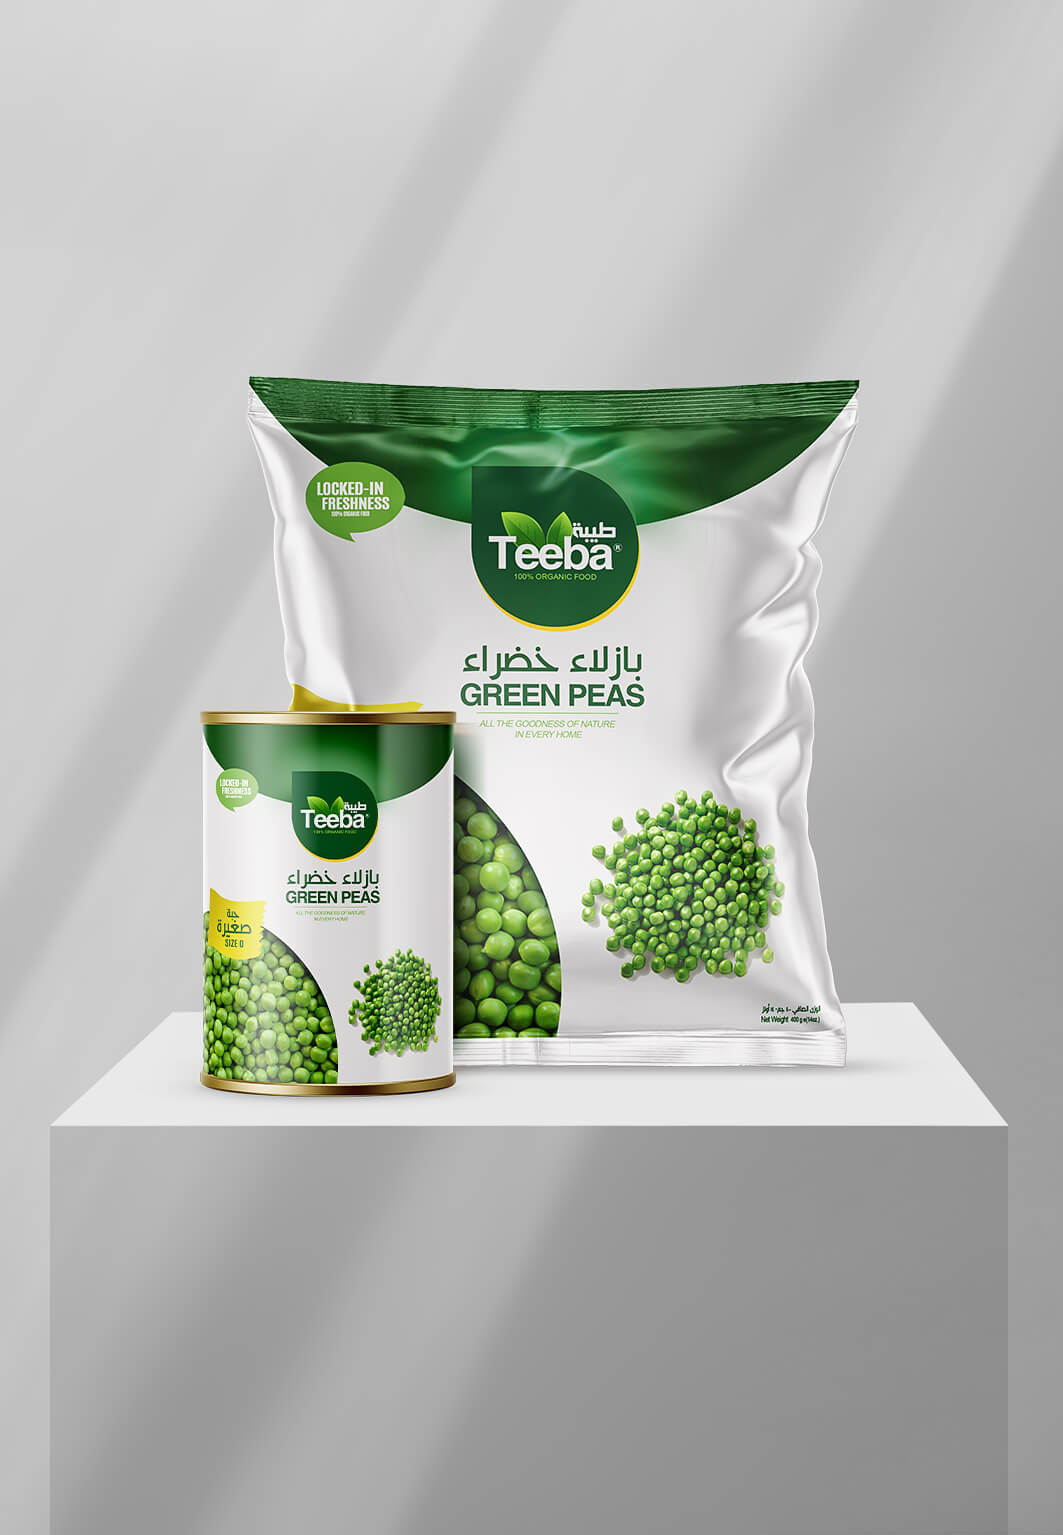 Teeba frozen food products are a fantastic option for anyone looking for high-quality, delicious frozen food. As the designer of their packaging, I can attest to the fact that they have a wide variety of products, from plastic bags to tin options, all of which are beautifully presented. The packaging design features a stunning combination of dark green and white, which provides a fresh and modern look to the products. Teeba frozen food products are manufactured by an Egyptian company but based in Ireland. With their extensive range of frozen food products, Teba is sure to have something to suit every taste and preference.<br />
Designing frozen food packaging that stands out from the competition can be a daunting task, but it was one that I relished. I had to consider various factors such as the brand's values, target audience, and market trends while coming up with a design that would make Teeba's frozen food products more appealing to customers. The challenge was to create a design that not only looked great but also conveyed the quality and freshness of the products. However, with careful consideration of every detail, I was able to design packaging that truly stands out on store shelves and helps Teeba's frozen food products to stand out from the crowd.